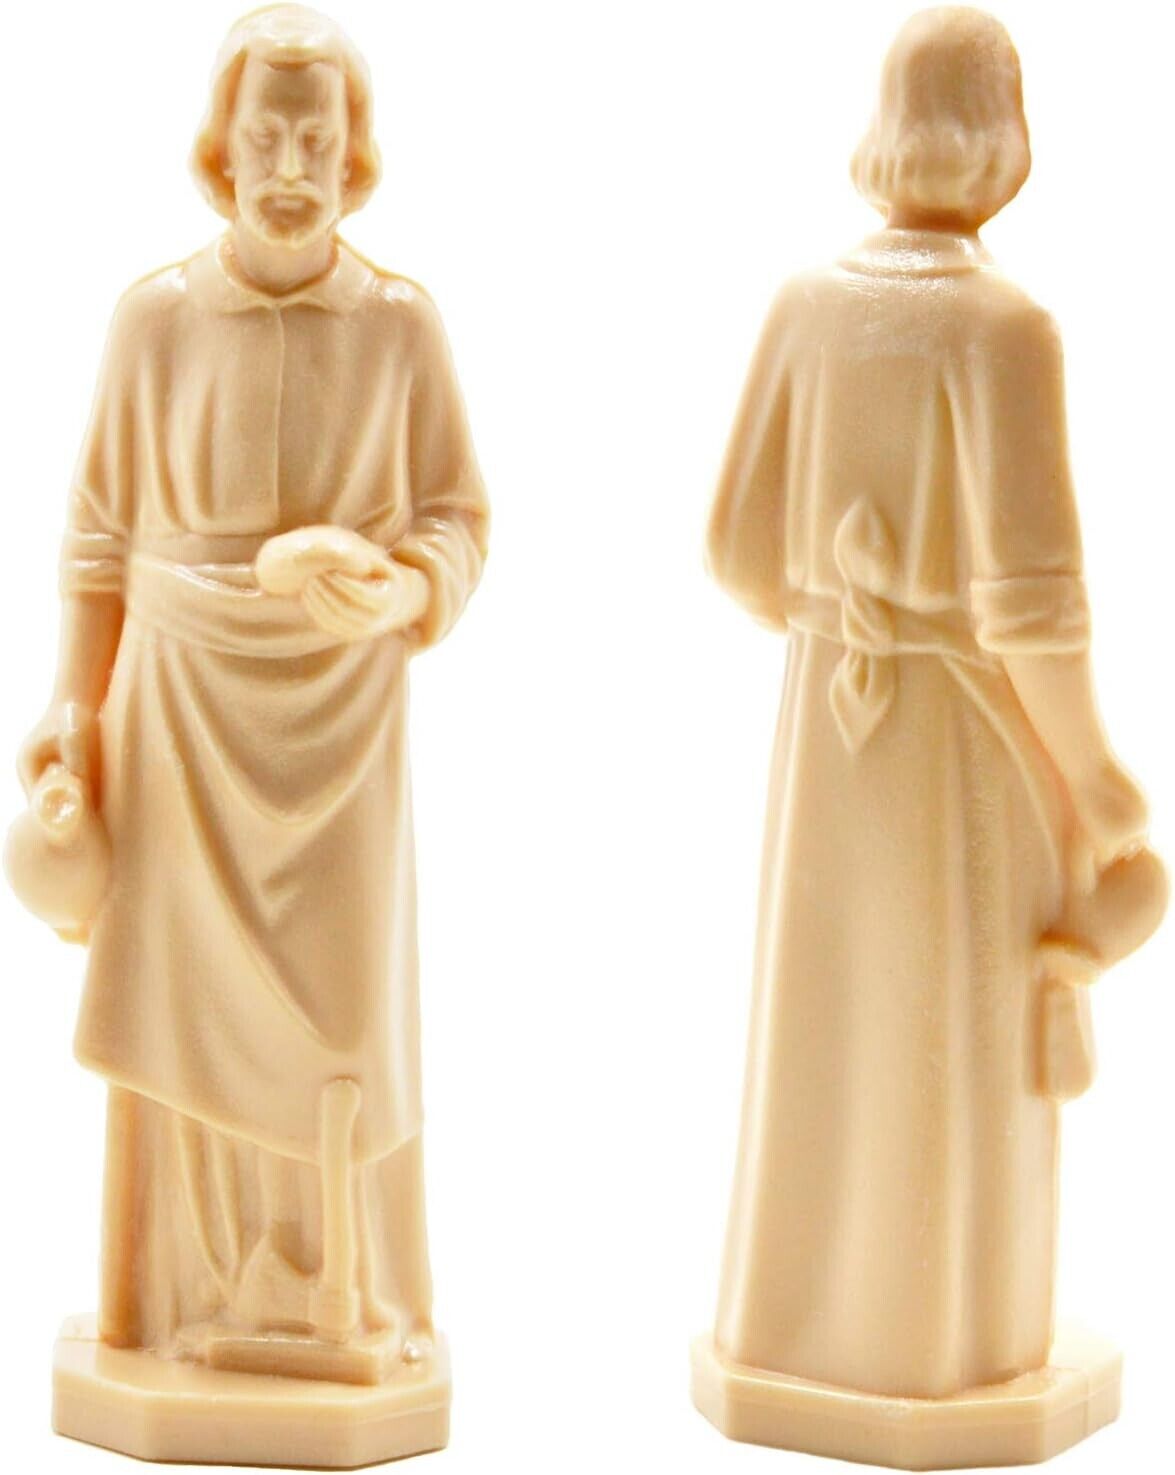 Home Seller Kit Saint Joseph Statue with Prayer Card and Instructions for Use